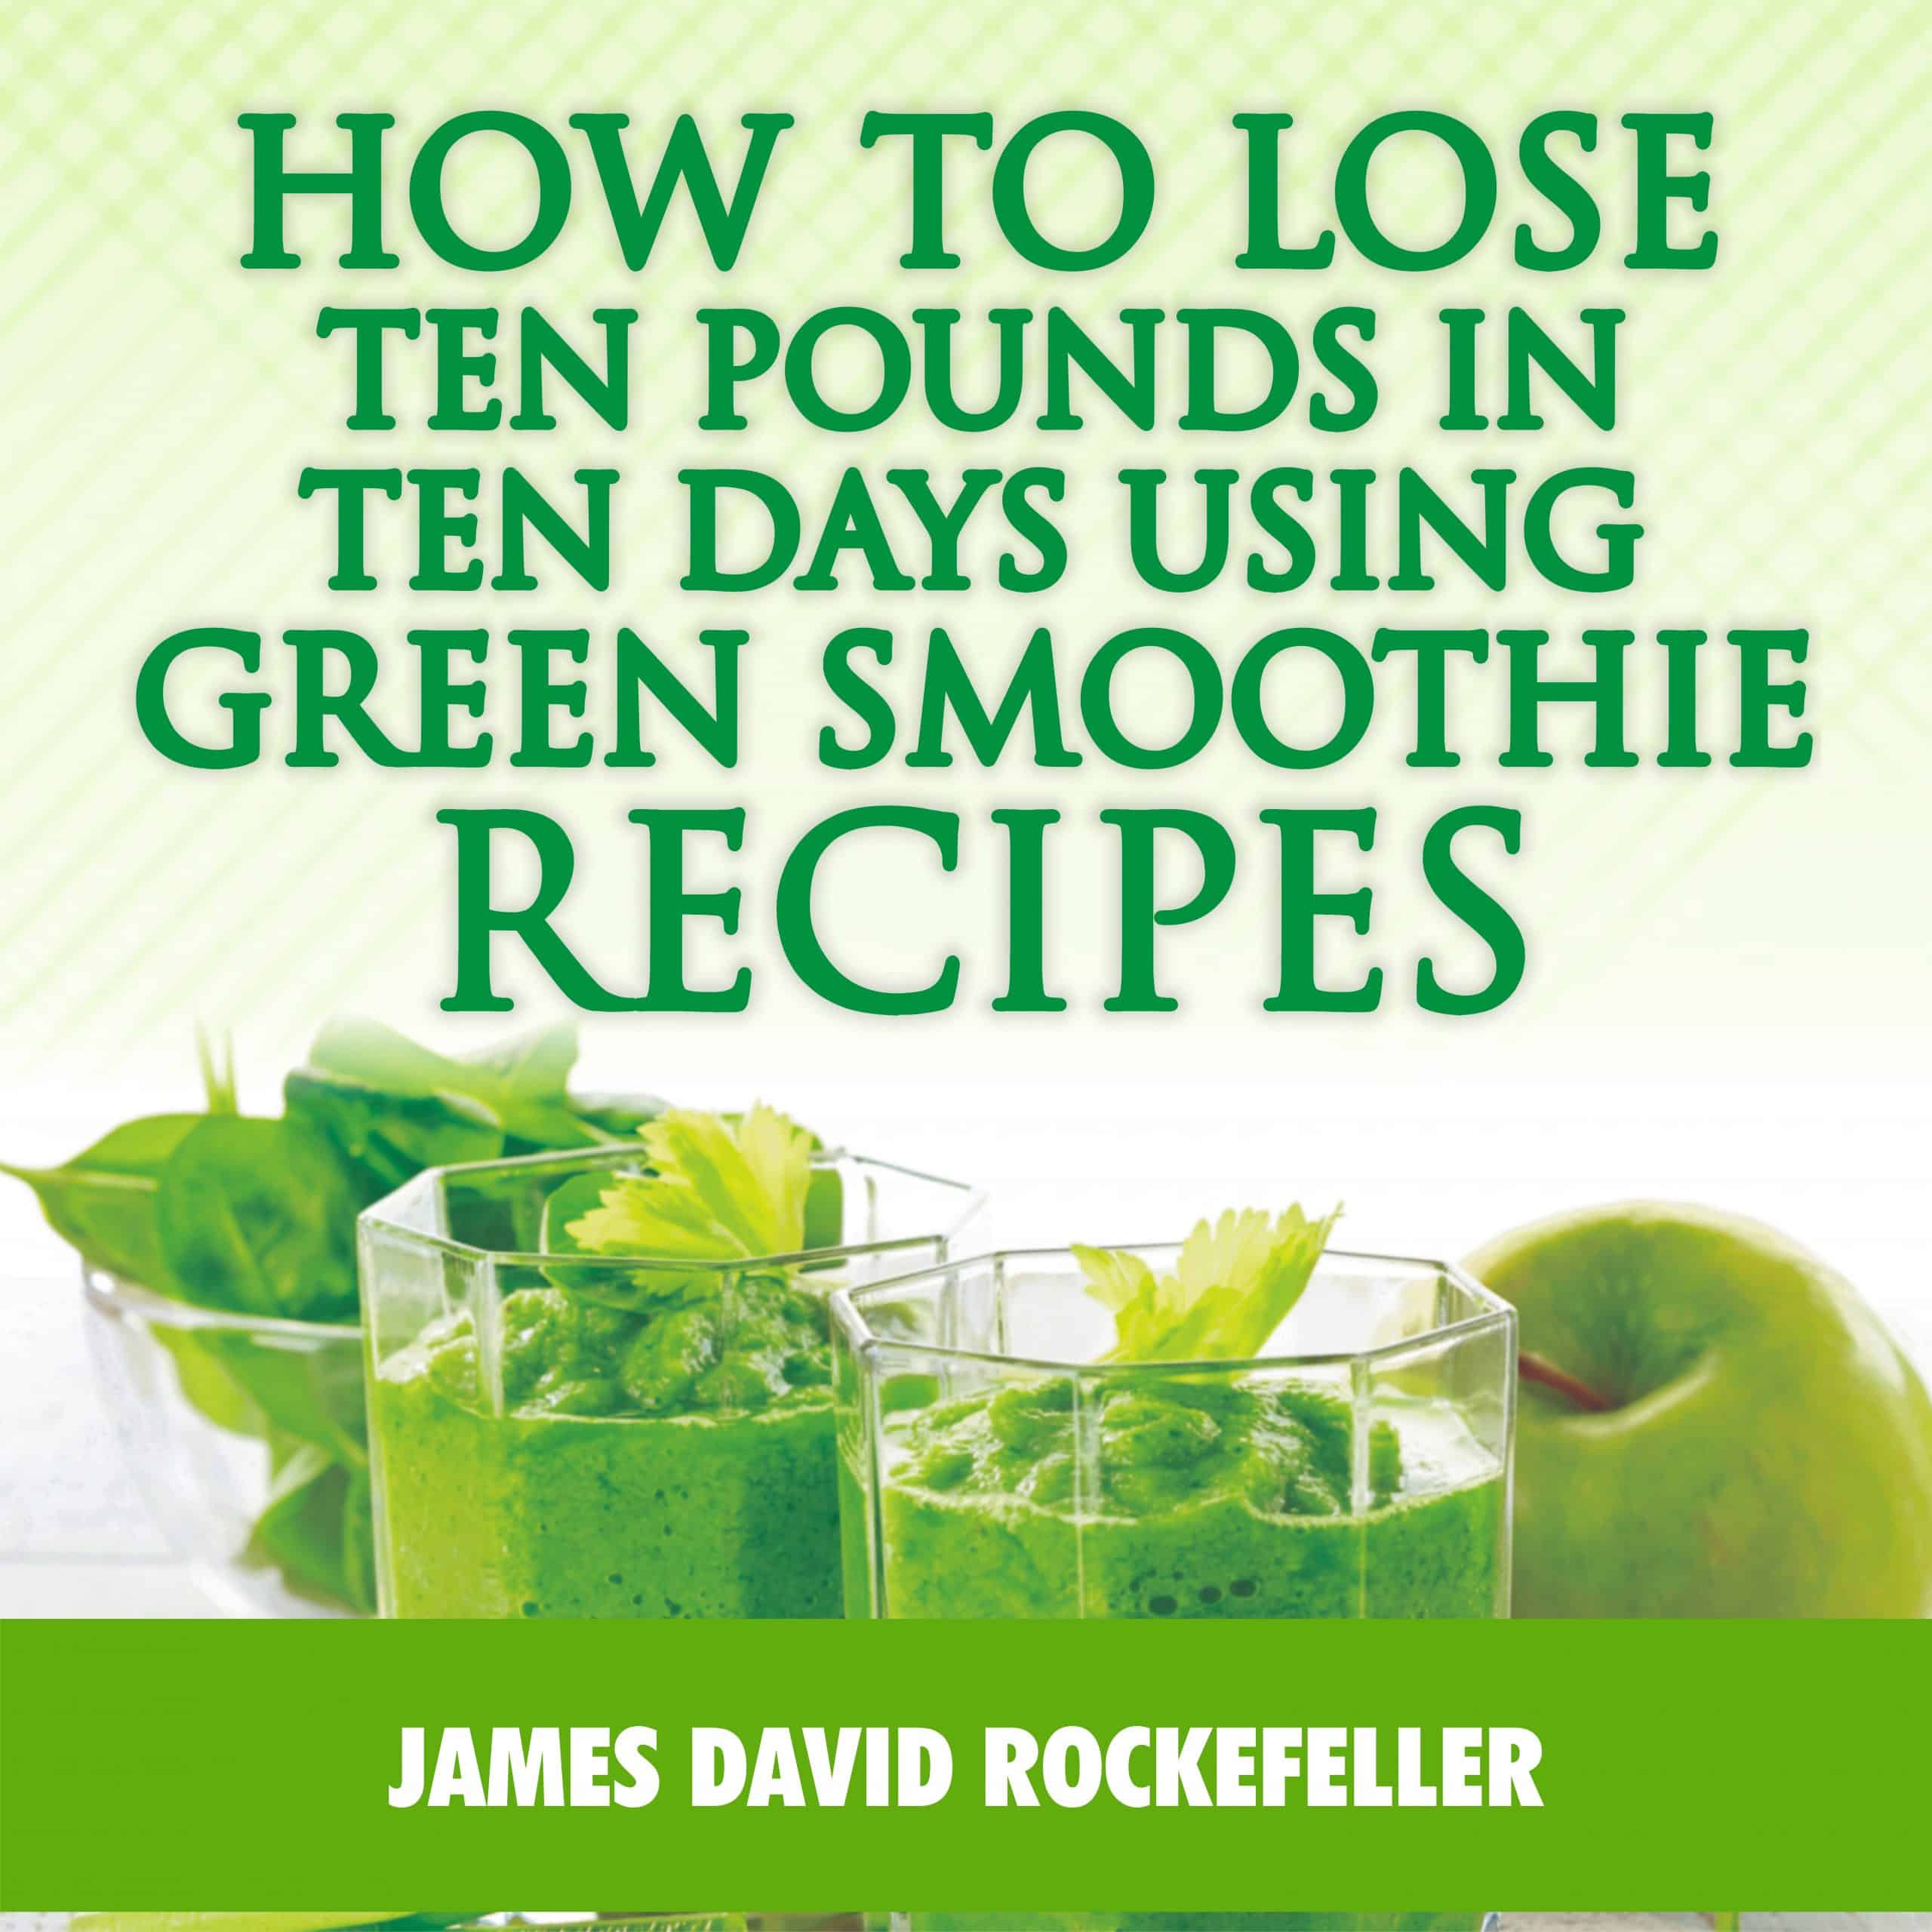 How to Lose Ten Pounds in Ten Days Using Green Smoothie Recipes ...